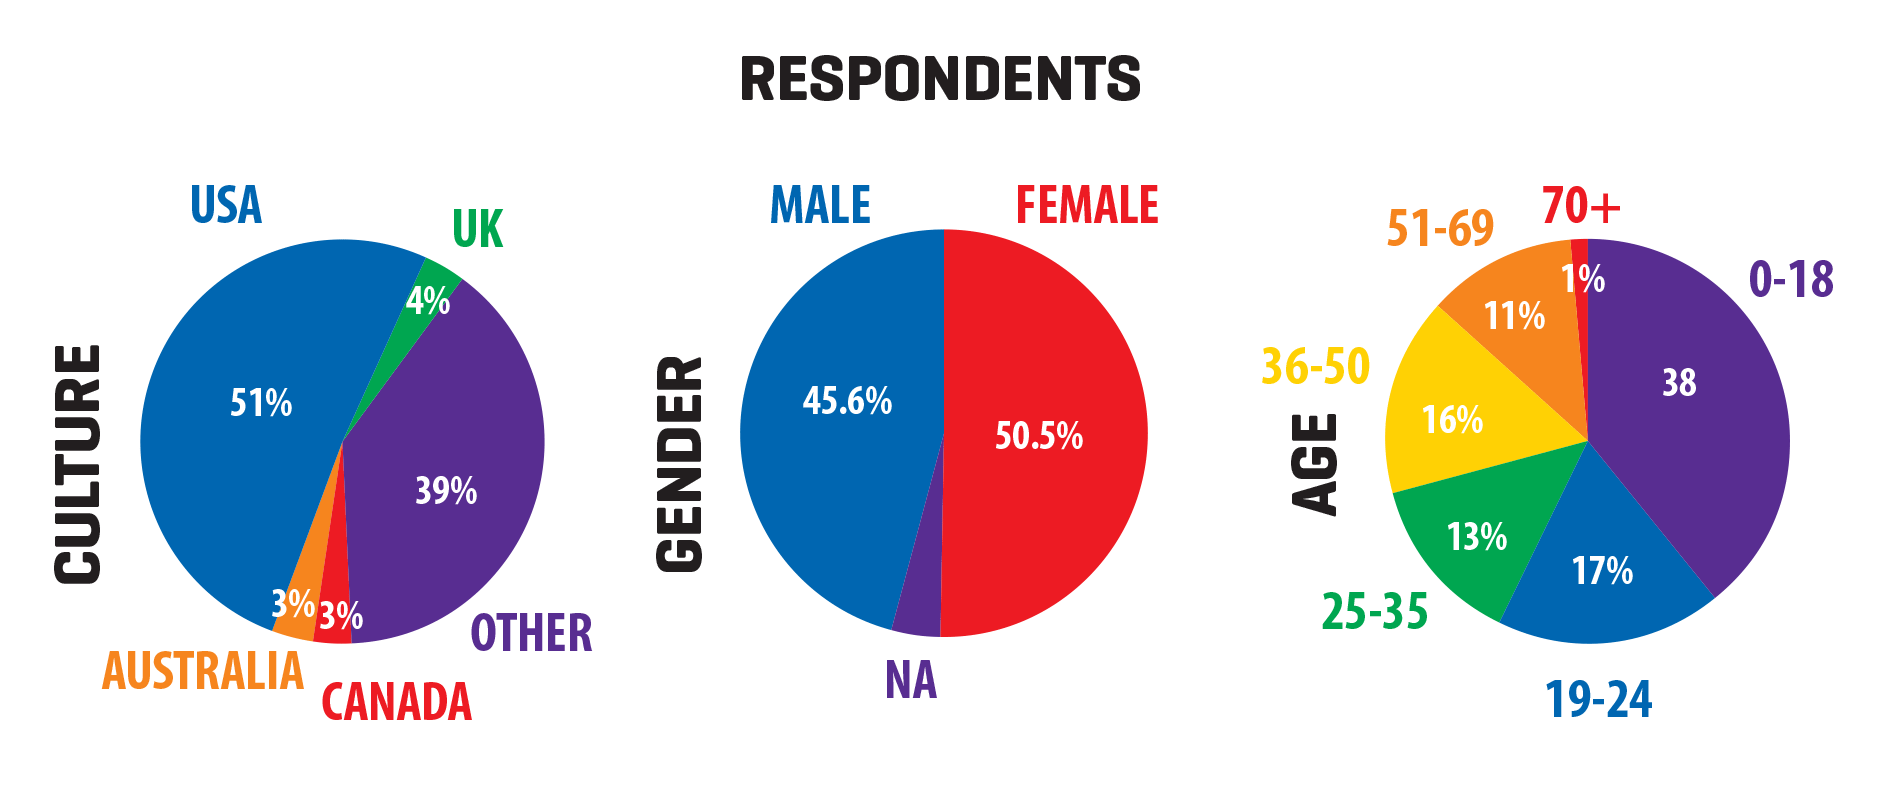 respondents to the color preferences survey by geography, age, and gender